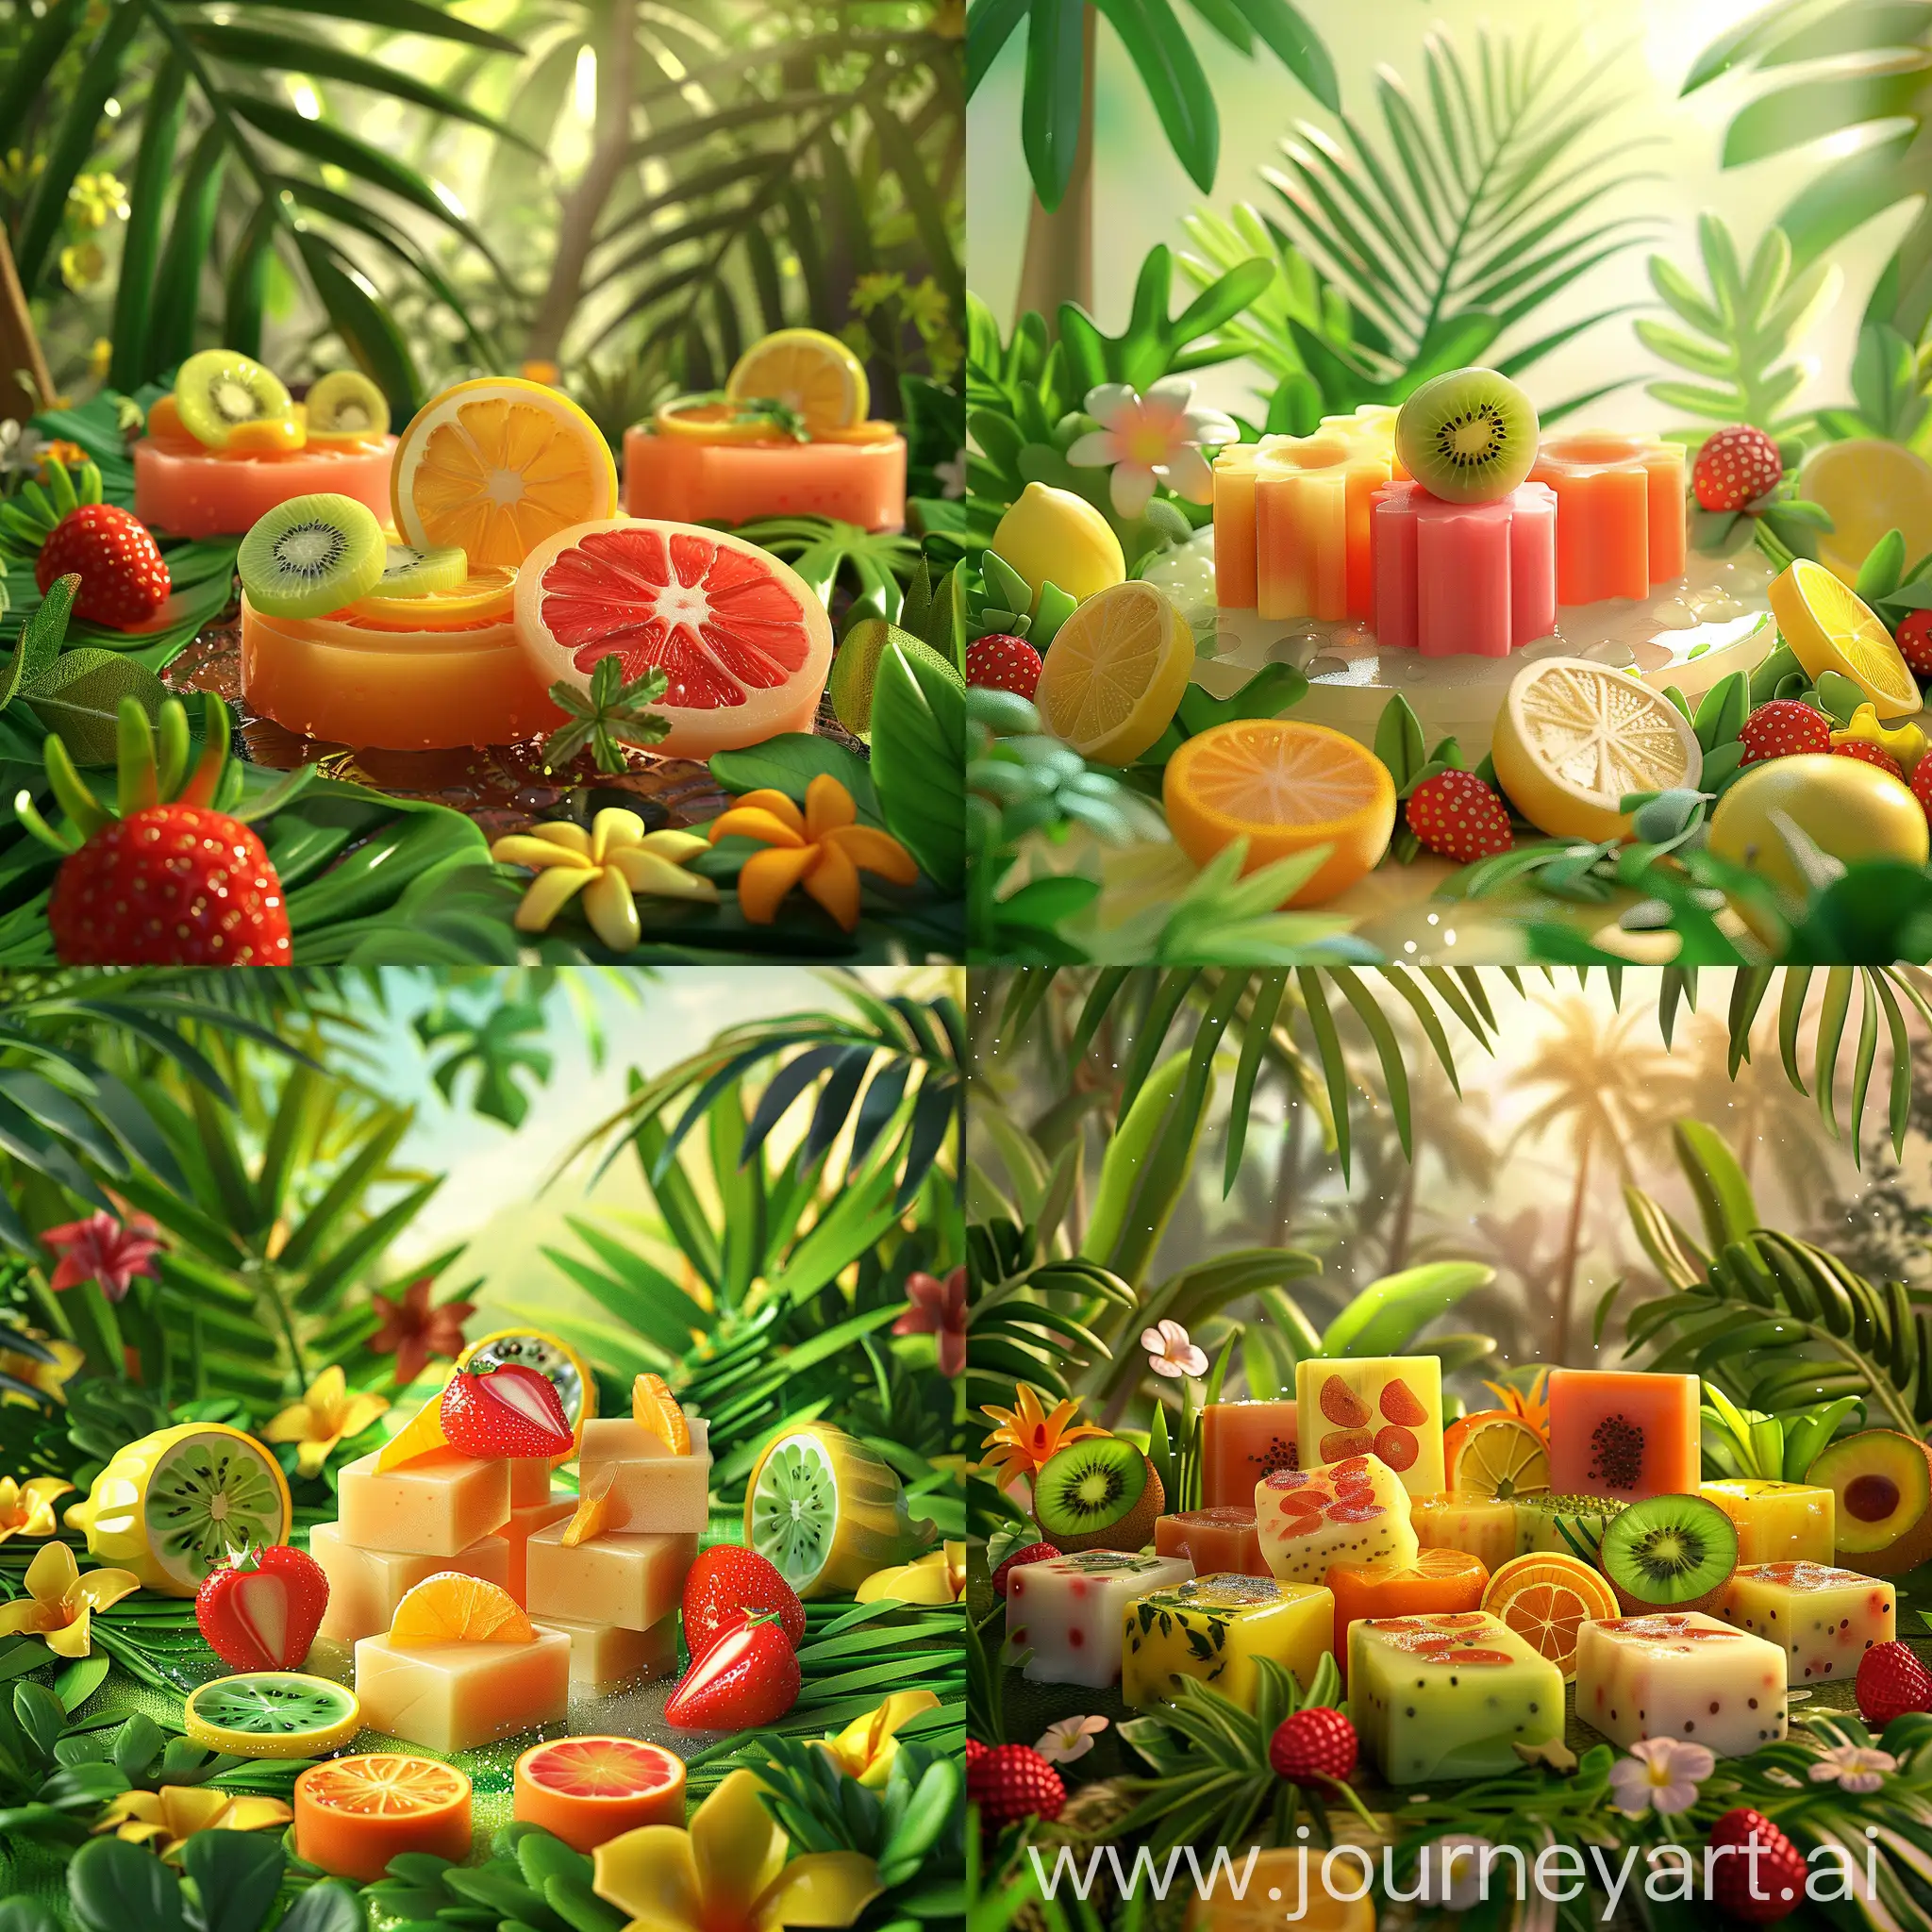 Centerpiece - Fruit Soap: Place several pieces of fruit soap in the center of the composition. The soap can be shaped and colored to resemble the actual fruit in the composition, such as orange, lemon, strawberry or kiwi. This will give the composition an added element of freshness and originality.  Background - Tropical Landscape: Create a background with a tropical landscape to serve as a backdrop for the fruit soap. Around the soap, place tropical landscape elements such as palm trees and flowering plants to create an atmosphere of summer vacation and relaxation.  Additional elements - Leaves and flowers: Place green leaves and brightly colored flowers around the soap and throughout the composition. This will help in creating contrast and add to the picturesqueness of the composition.  Lighting - Sunlight and Shadows: Use natural light to create the effect of sunlight filtering through the foliage to create a play of light and shadow on the fruit soap and plants.  Color Palette - Bright and Juicy Shades: Use bright and juicy colors for fruit soaps to highlight their freshness and natural beauty.  3D model